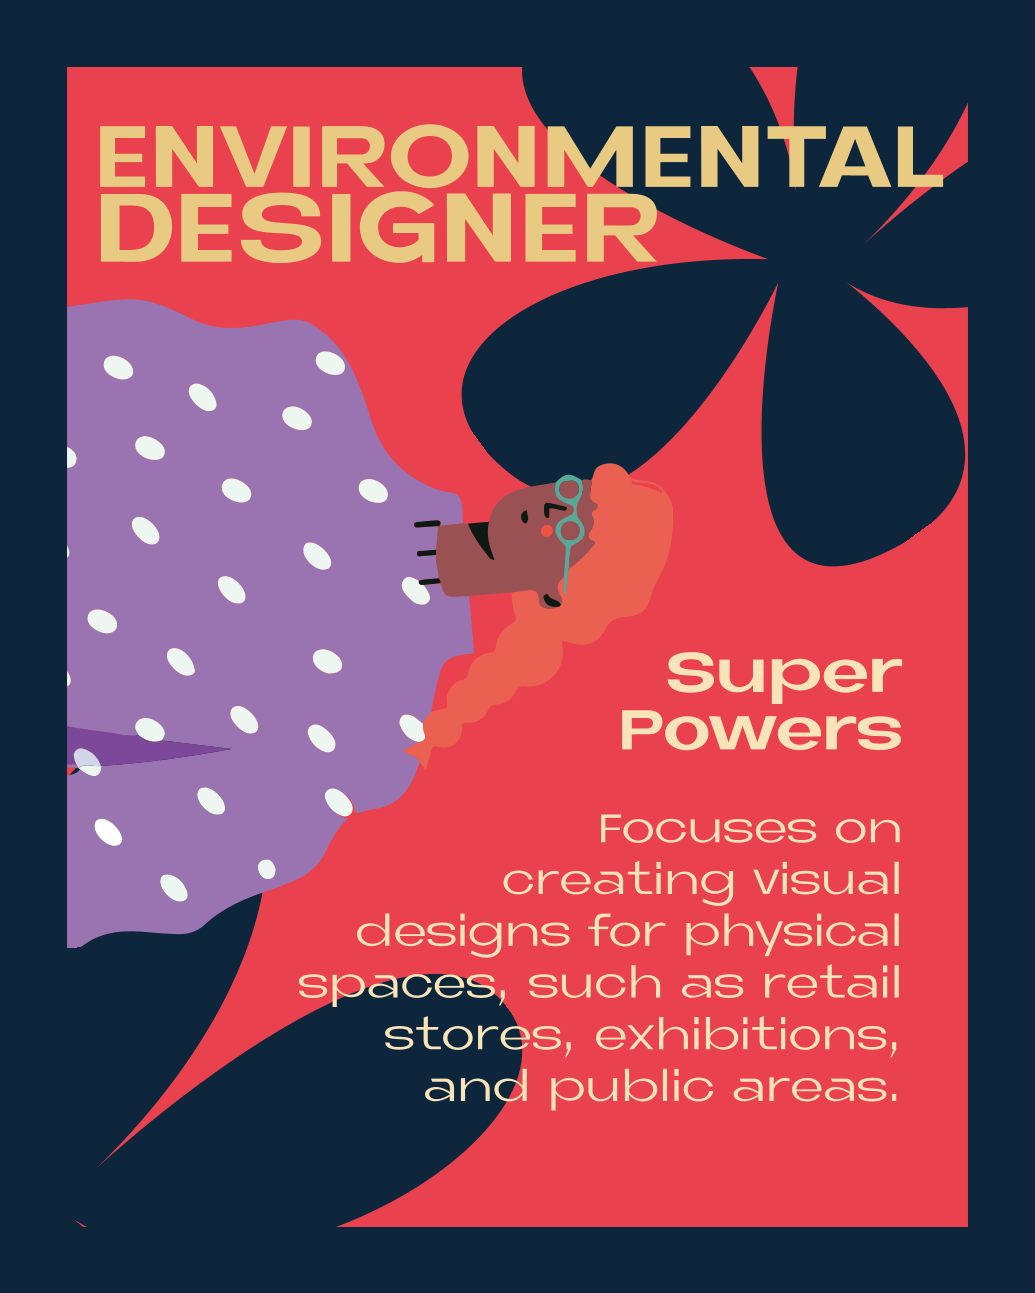 ENVIRONMENTAL DESIGNER – Super Powers: Focuses on creating visual designs for physical spaces, such as retail stores, exhibitions, and public areas.